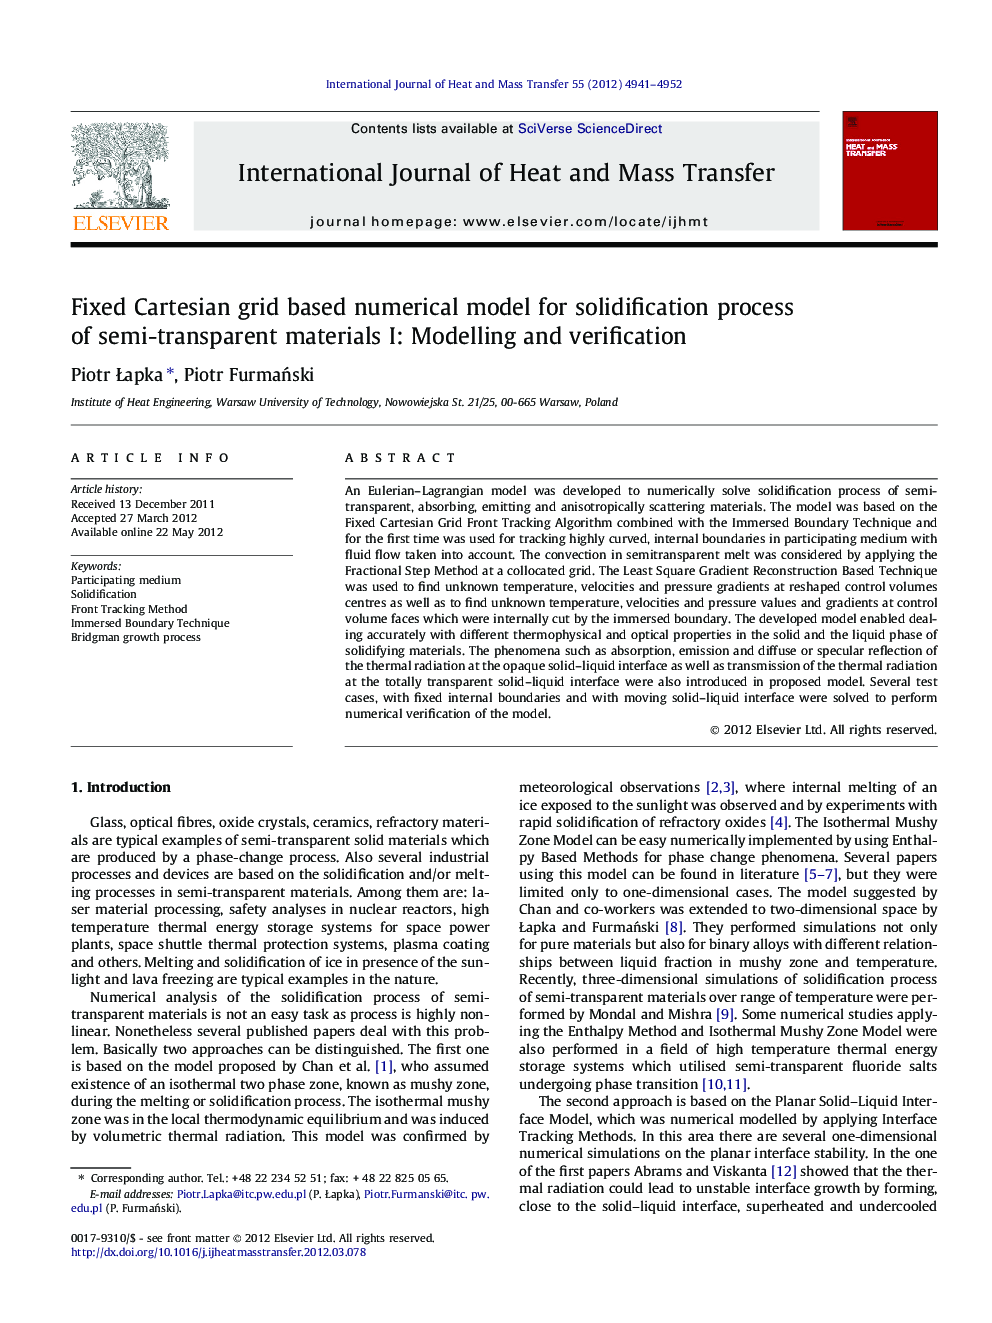 Fixed Cartesian grid based numerical model for solidification process of semi-transparent materials I: Modelling and verification